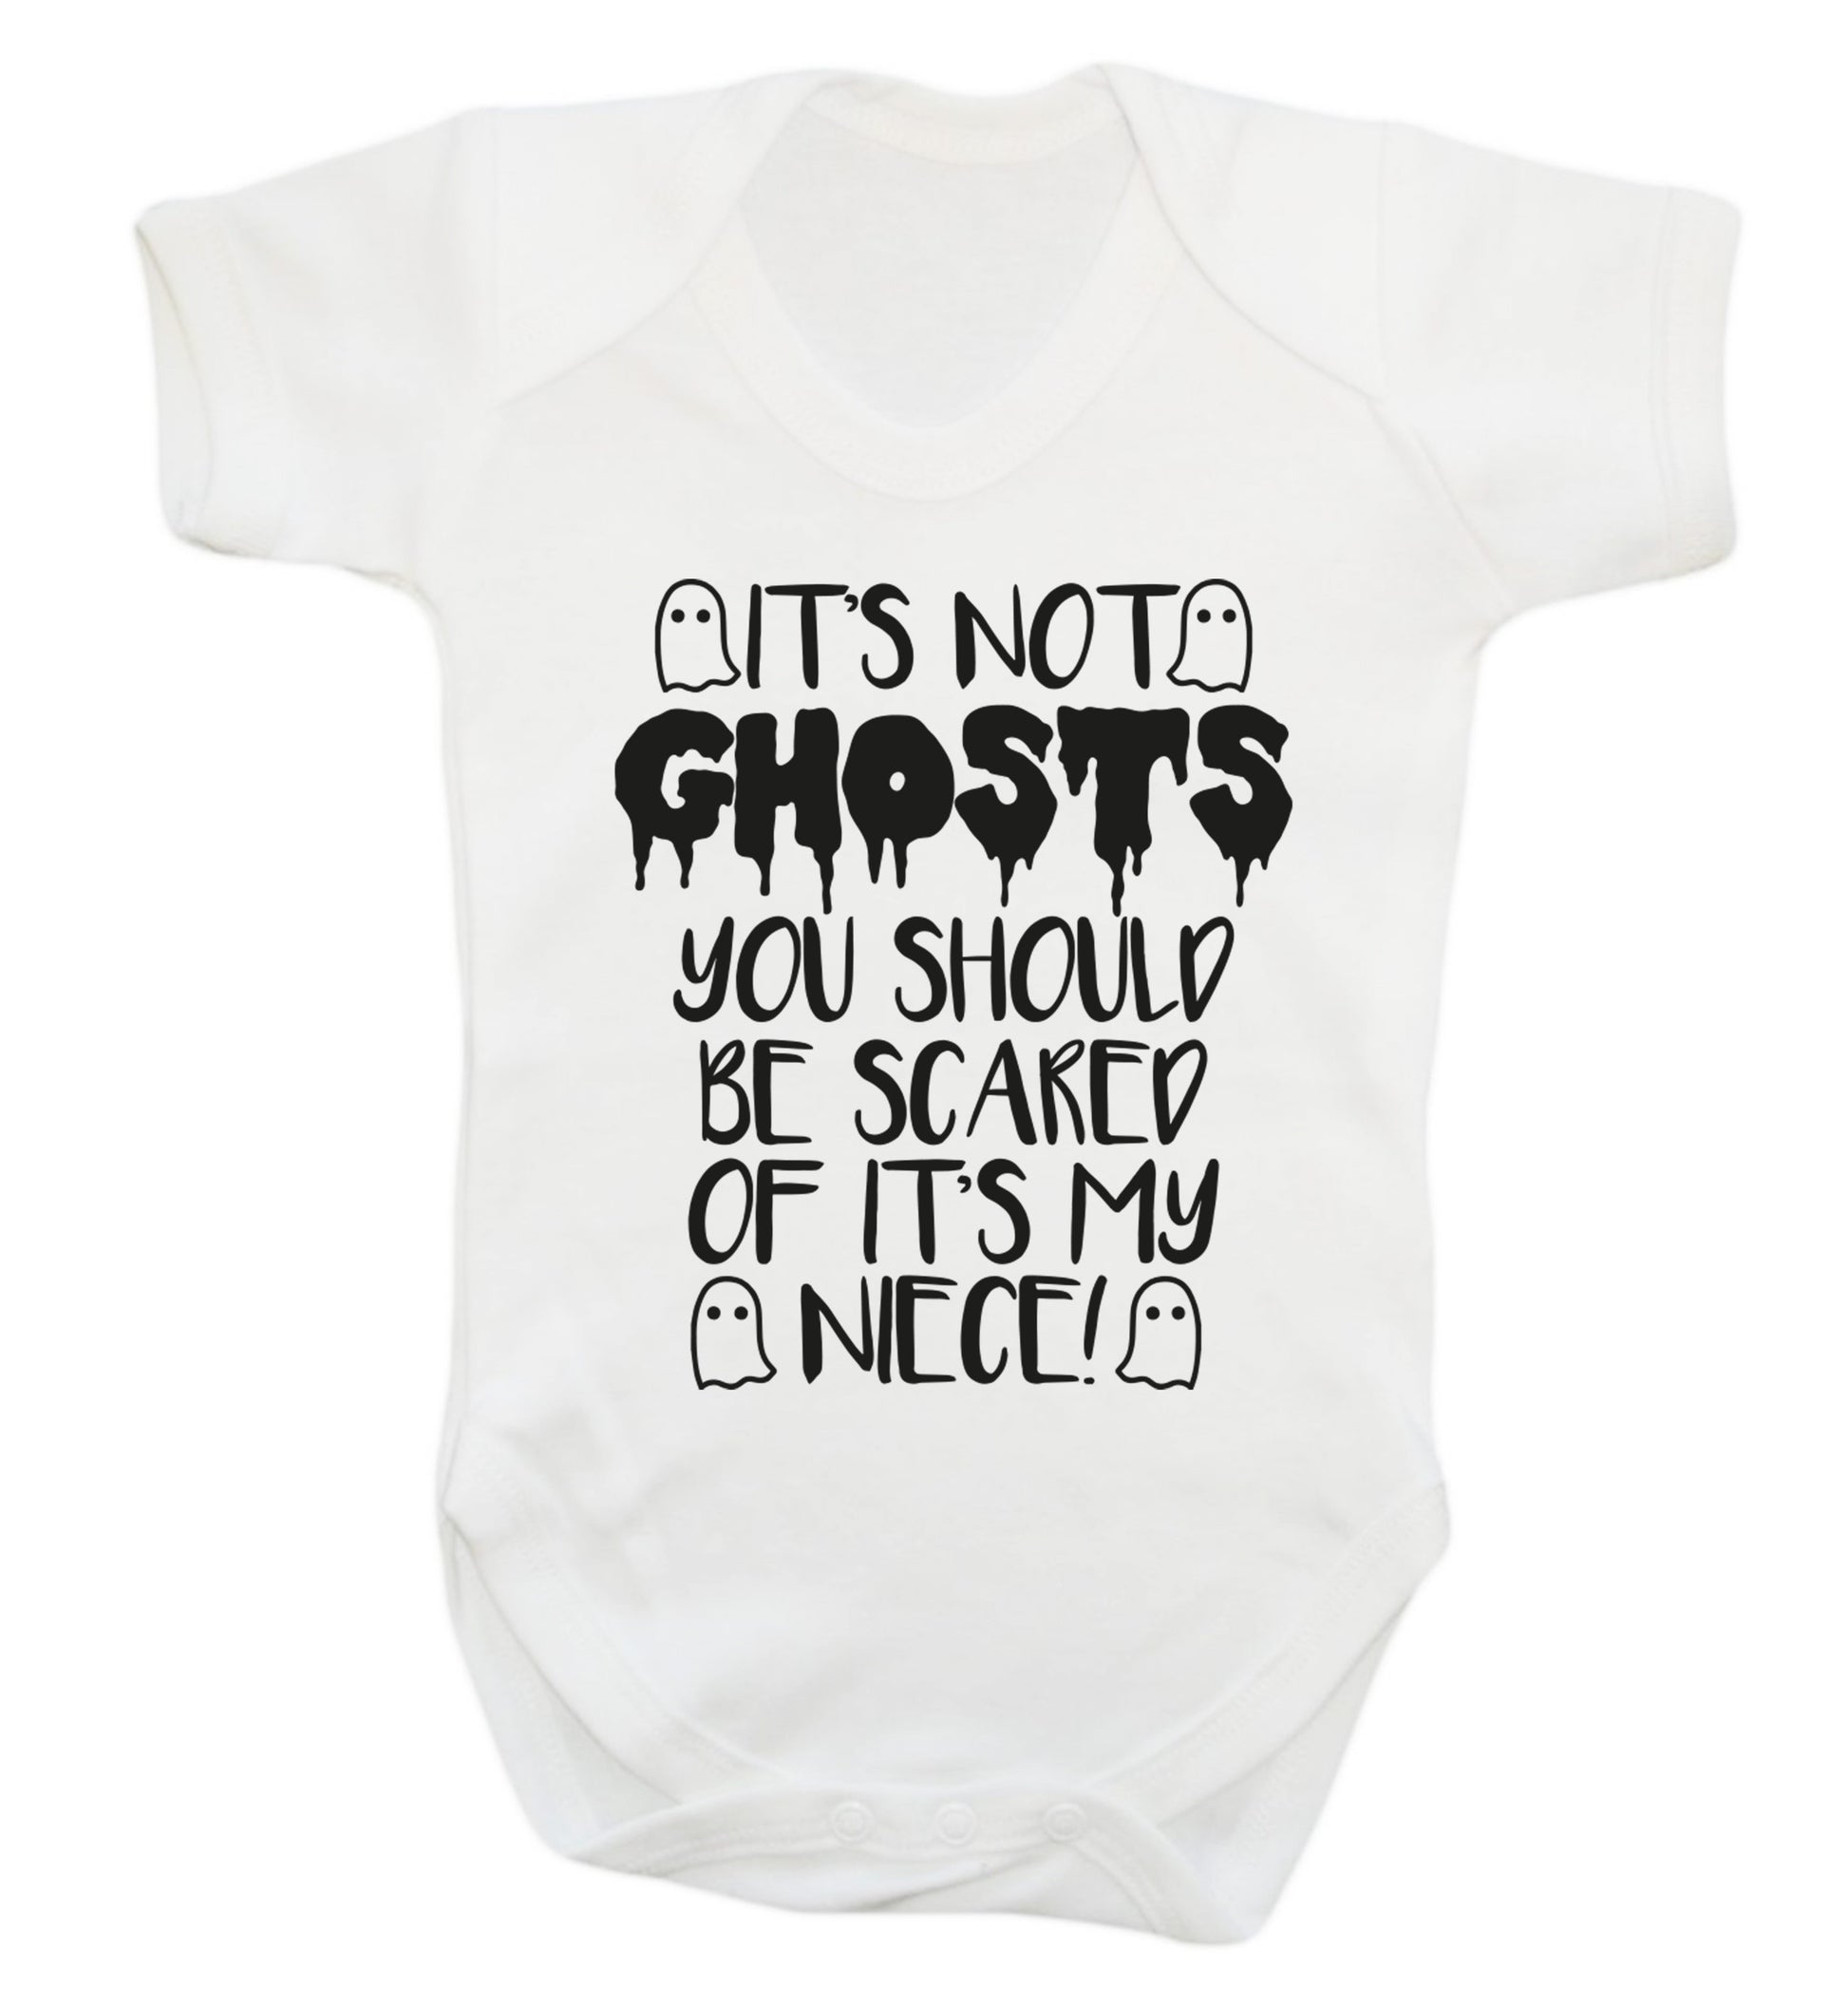 It's not ghosts you should be scared of it's my niece! Baby Vest white 18-24 months